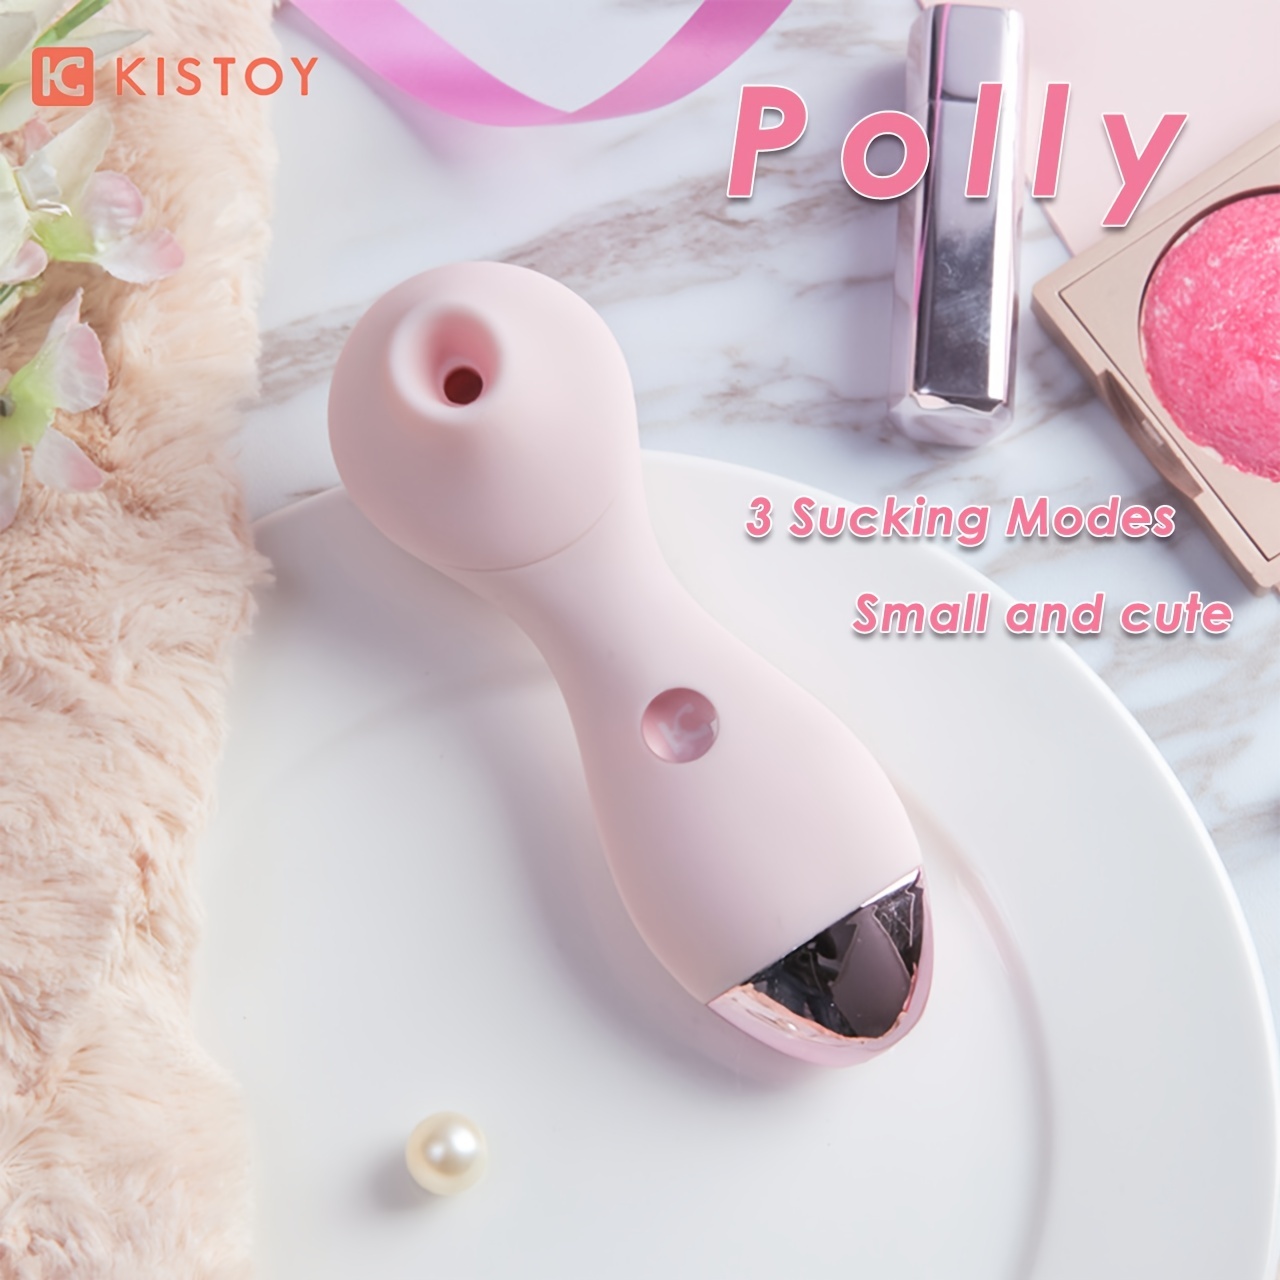 1pc Female Vibrator 3 Sucking Modes Silicone Body Usb Charging Clit Toy Comfortable Grip Waterproof For Daily Life Adult Sex Toys For Women And Couple - Health and Household image